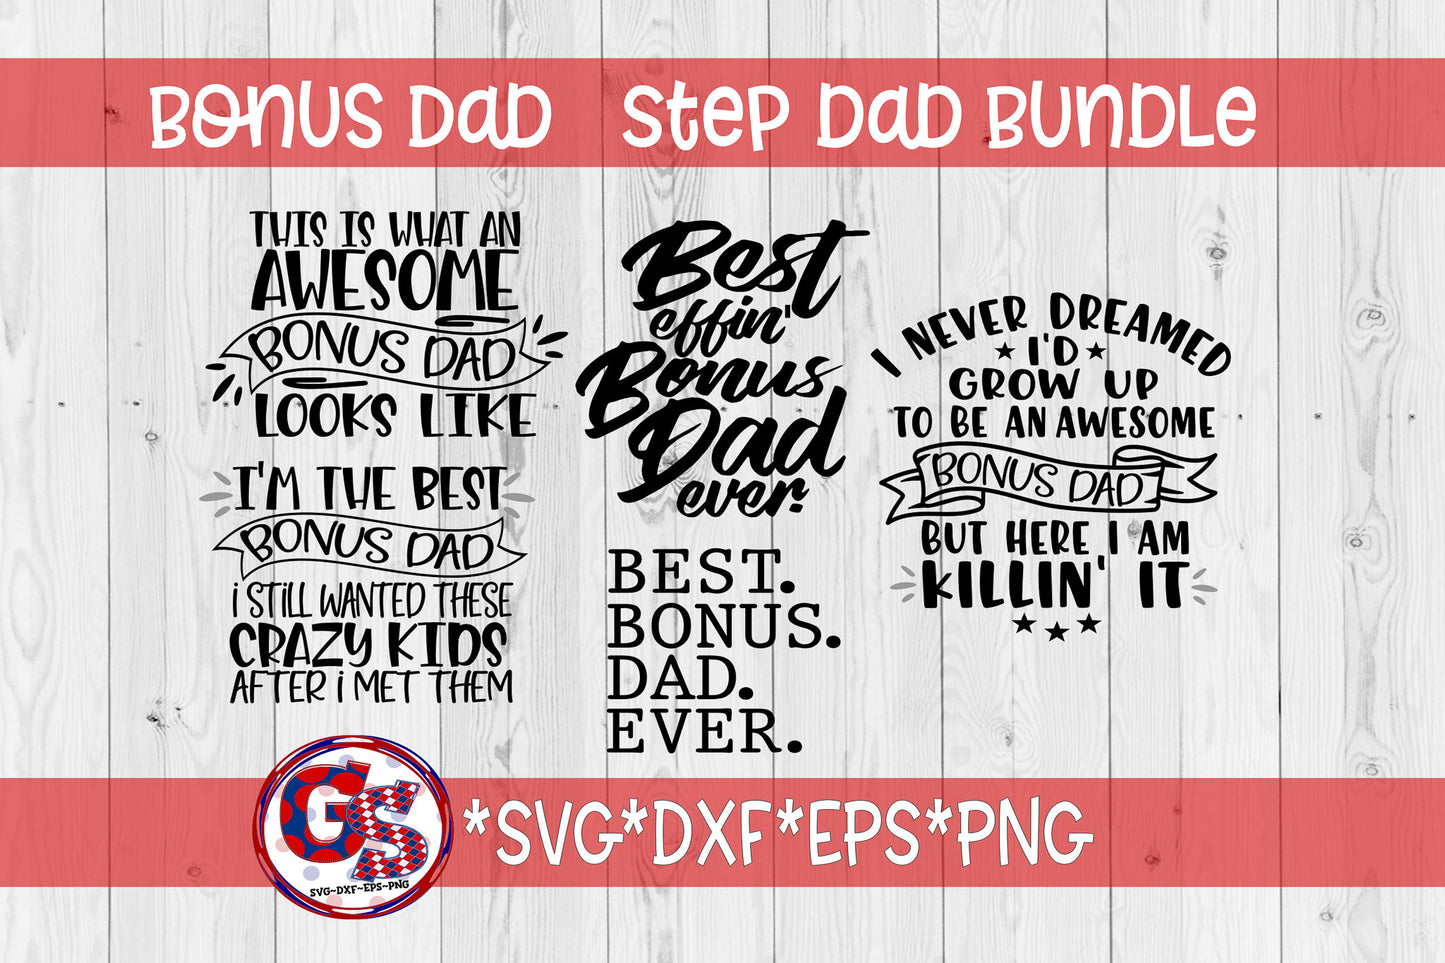 Father&#39;s Day Bonus Dad SvG Bundle | Father&#39;s Day SVG | Step Dad SVG | Bonus Dad | Best Bonus Dad svg dxf eps png. Instant Download Cut File